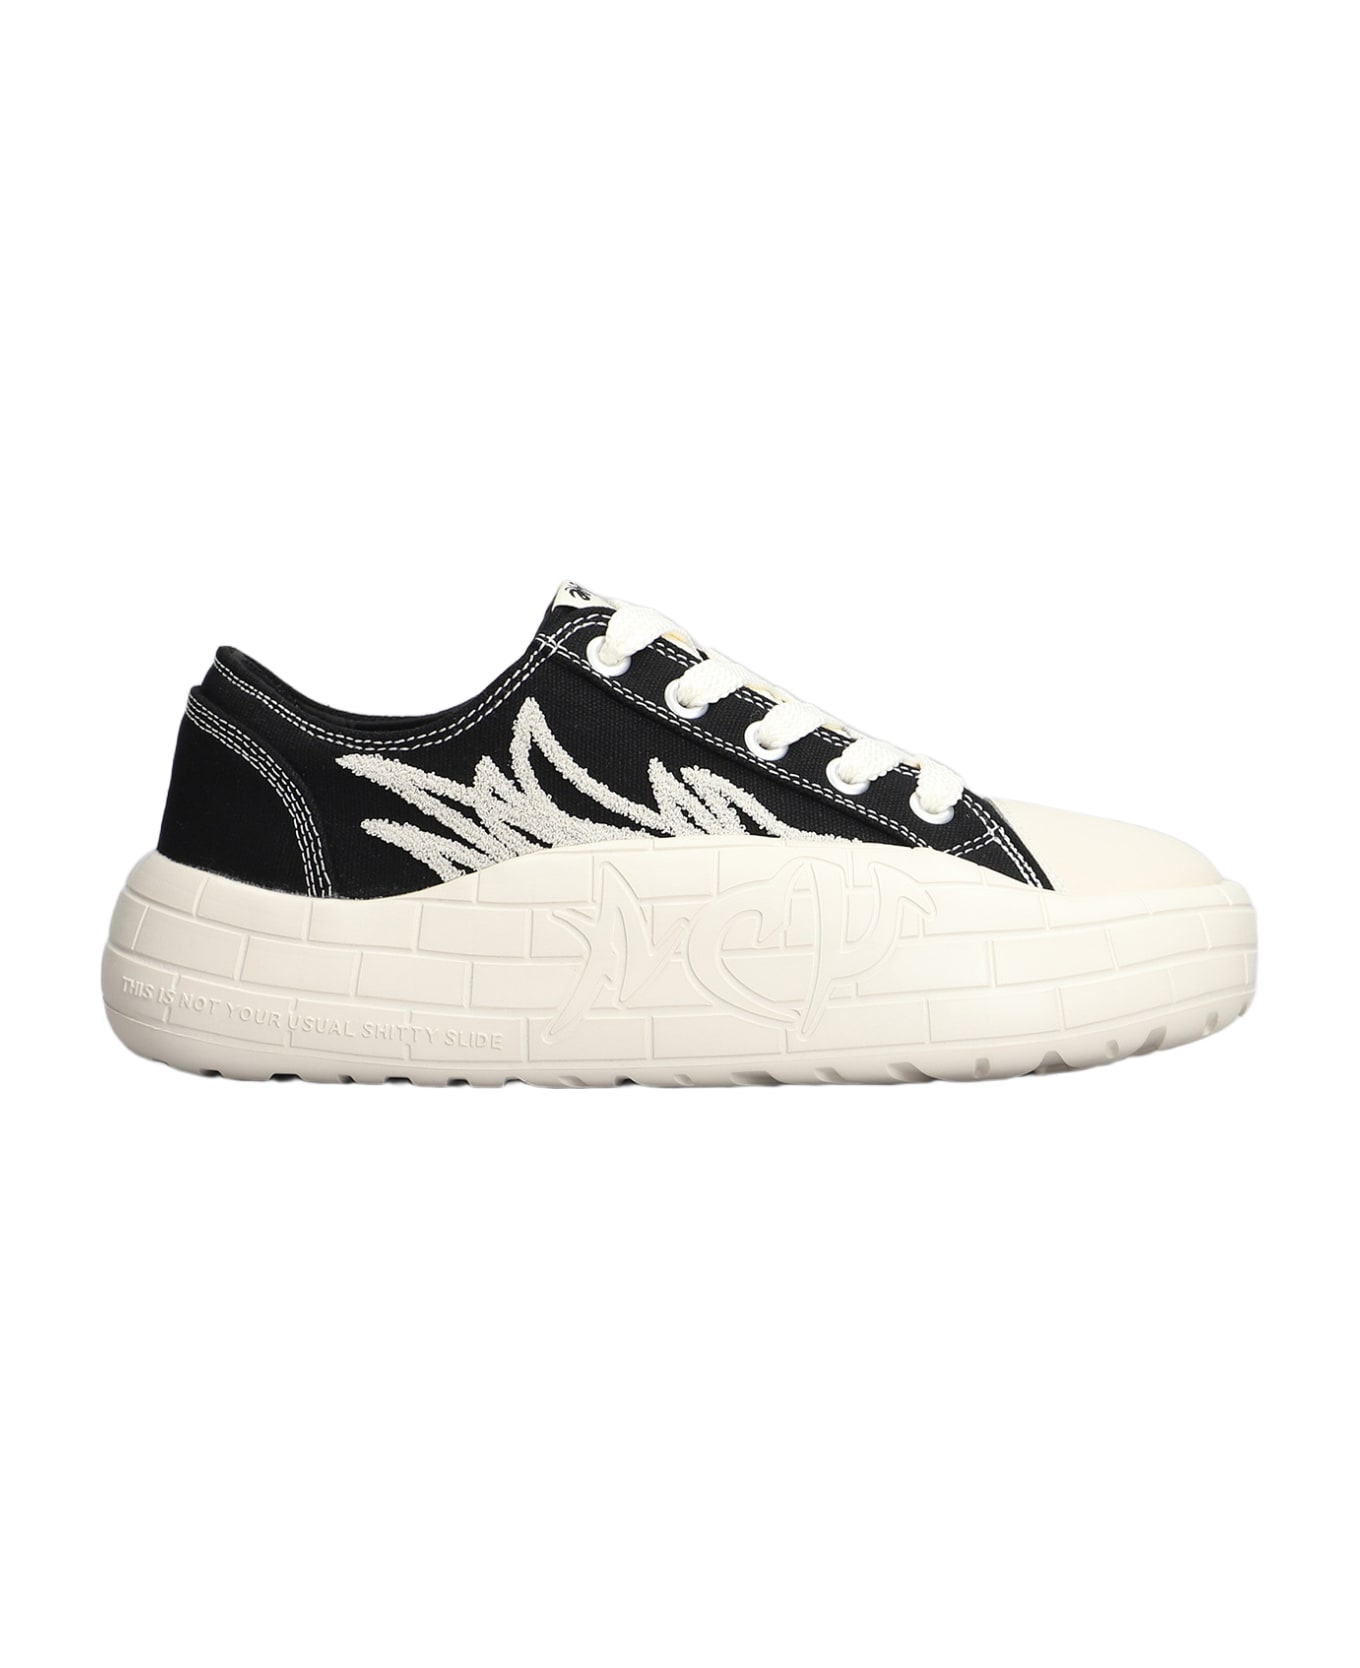 Acupuncture Nyu Vulc G2 Sneakers In Black Canvas - black スニーカー